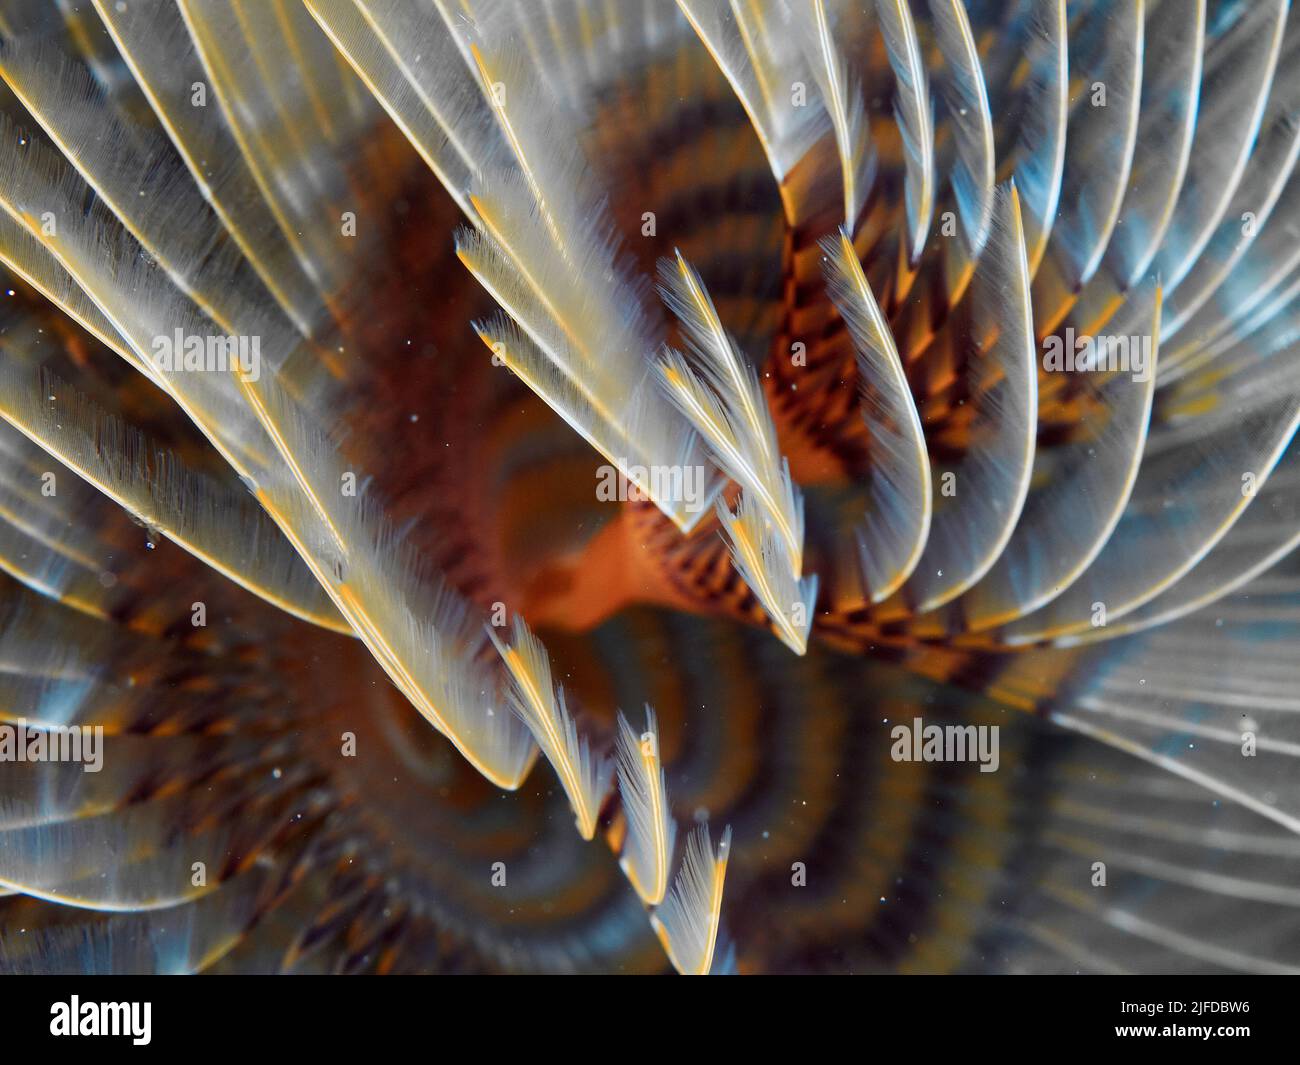 Texture of the gills of a tubeworm (Sabella spallanzani). Underwater picture of a live animal. Stock Photo